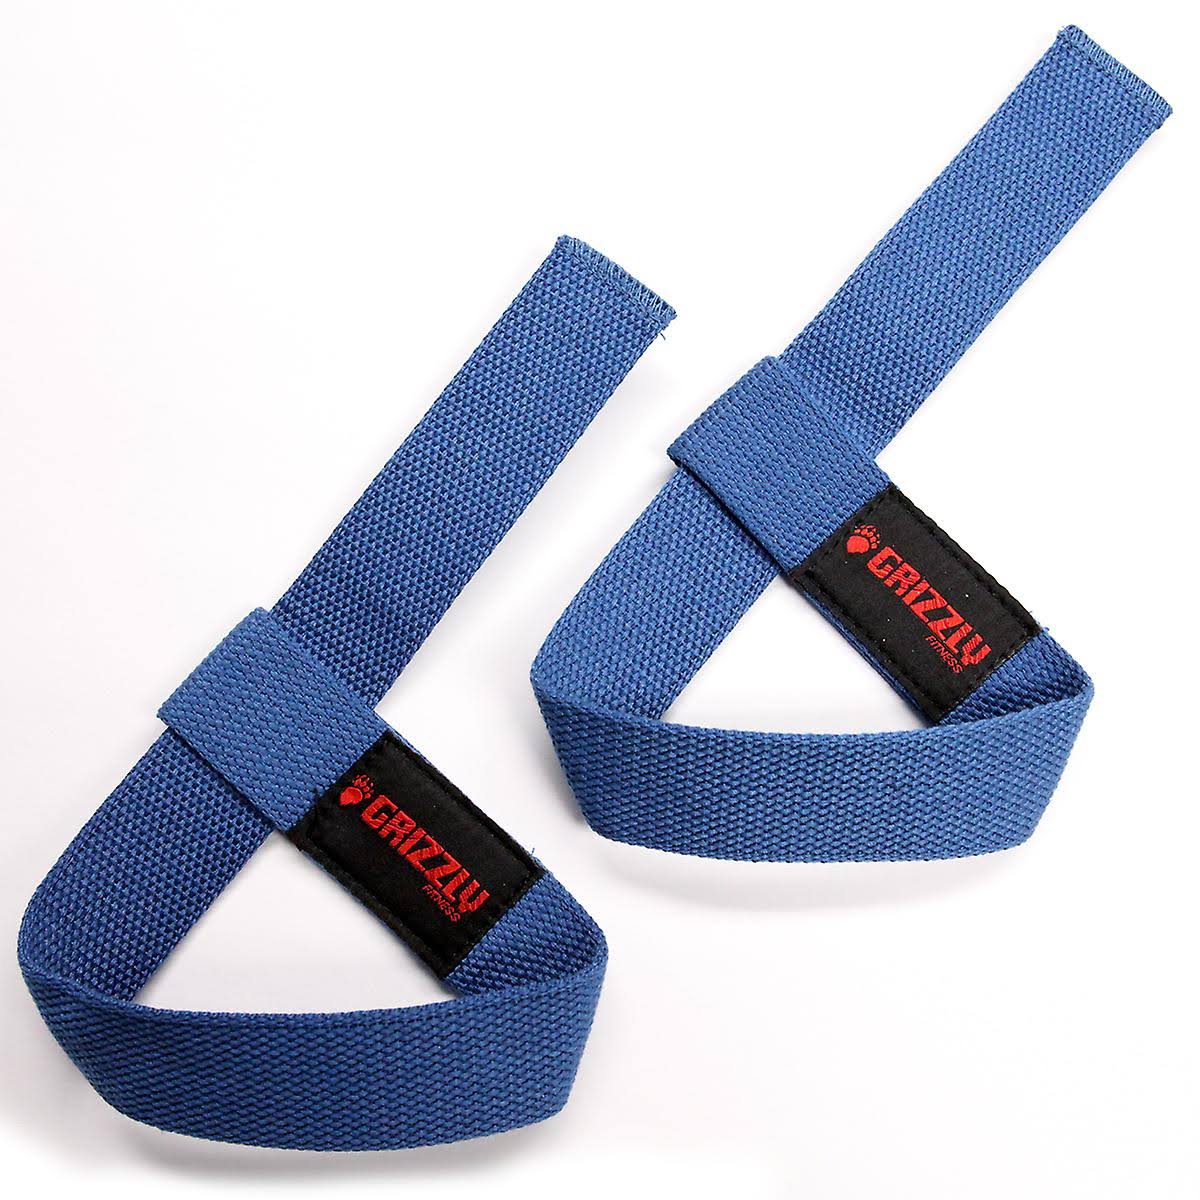 Grizzly Fitness Adjustable Cotton Weight Lifting Straps - Royal Blue